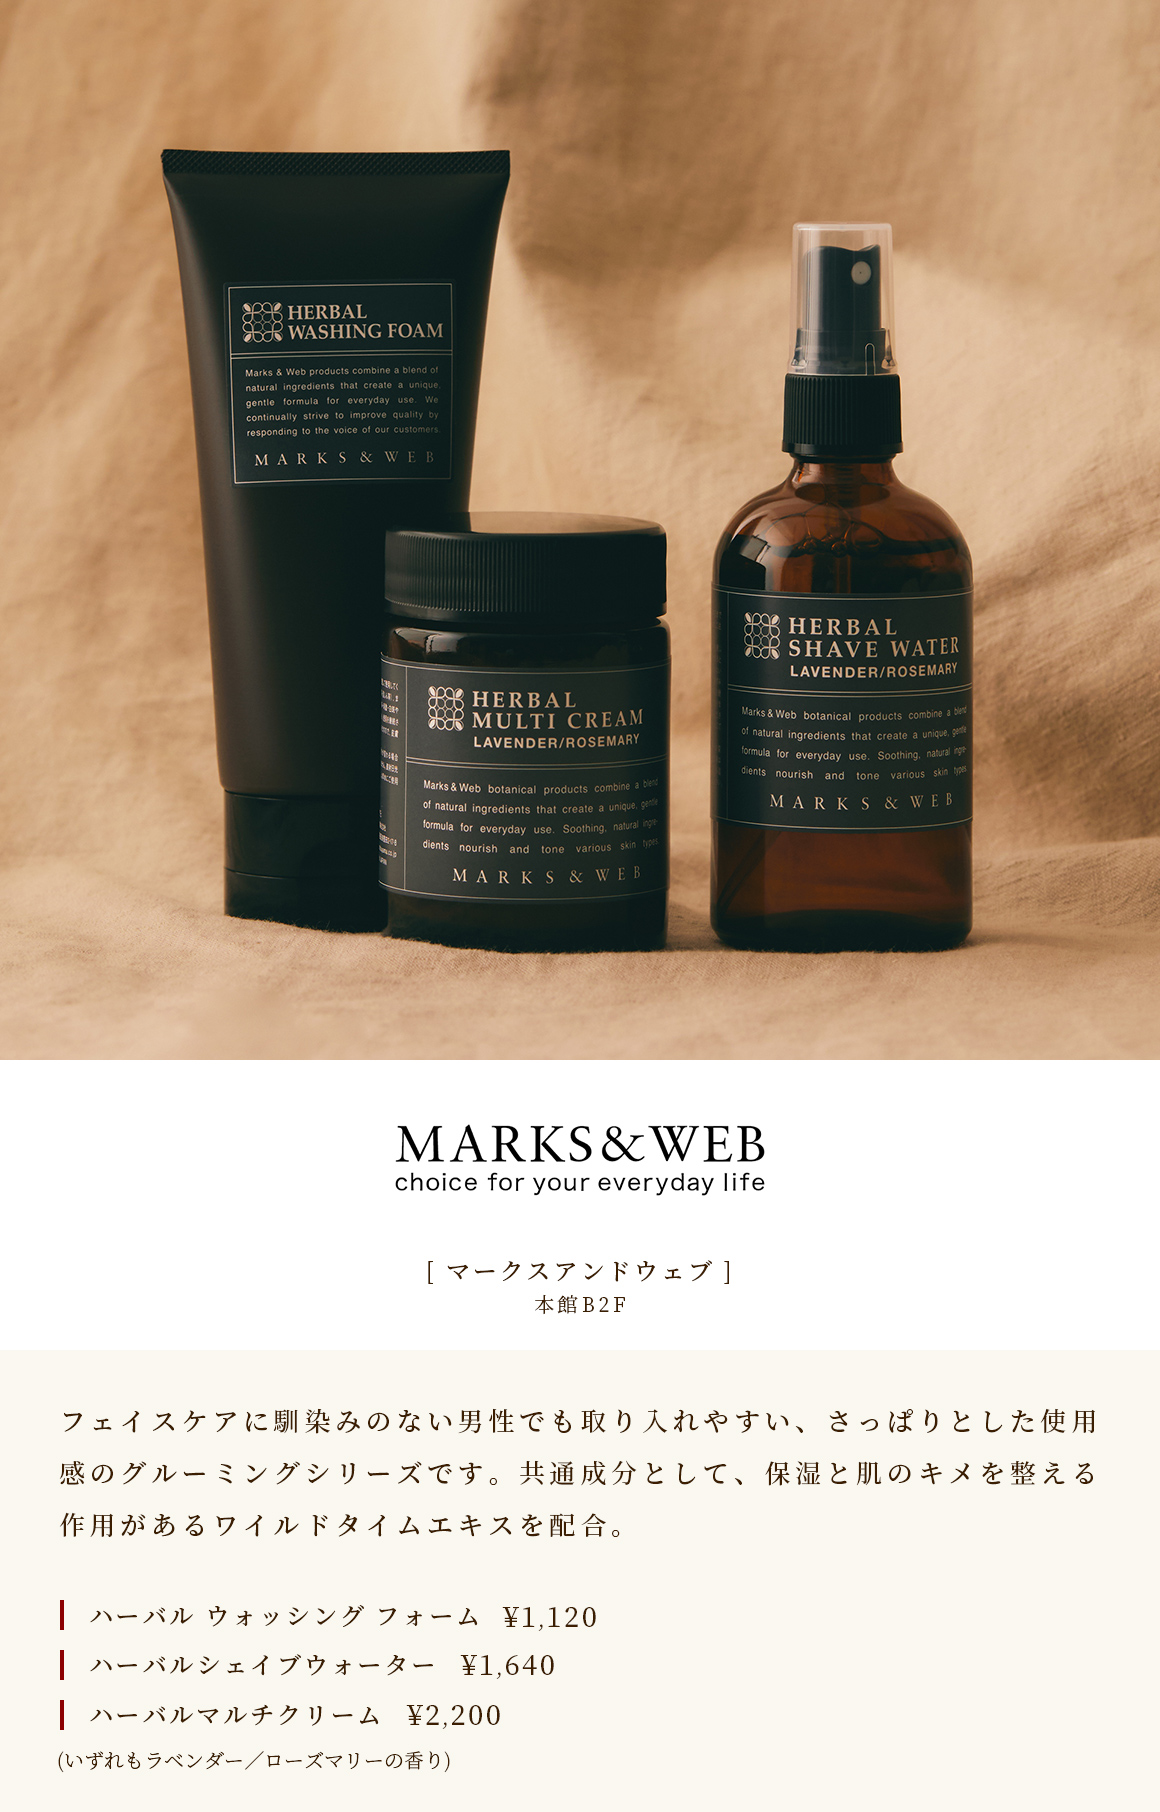 [MARKS＆WEB] Main Building B2F A grooming series with a refreshing feel that is easy for men who are not familiar with face care to take in. Contains wild thyme extract, which has a high moisturizing effect, as a common ingredient. Herbal Washing Foam ￥ 1,120 Herbal Shape Water ￥ 1,640 Herbal Multi Cream ￥ 2,200 (Both have lavender / rosemary scent)